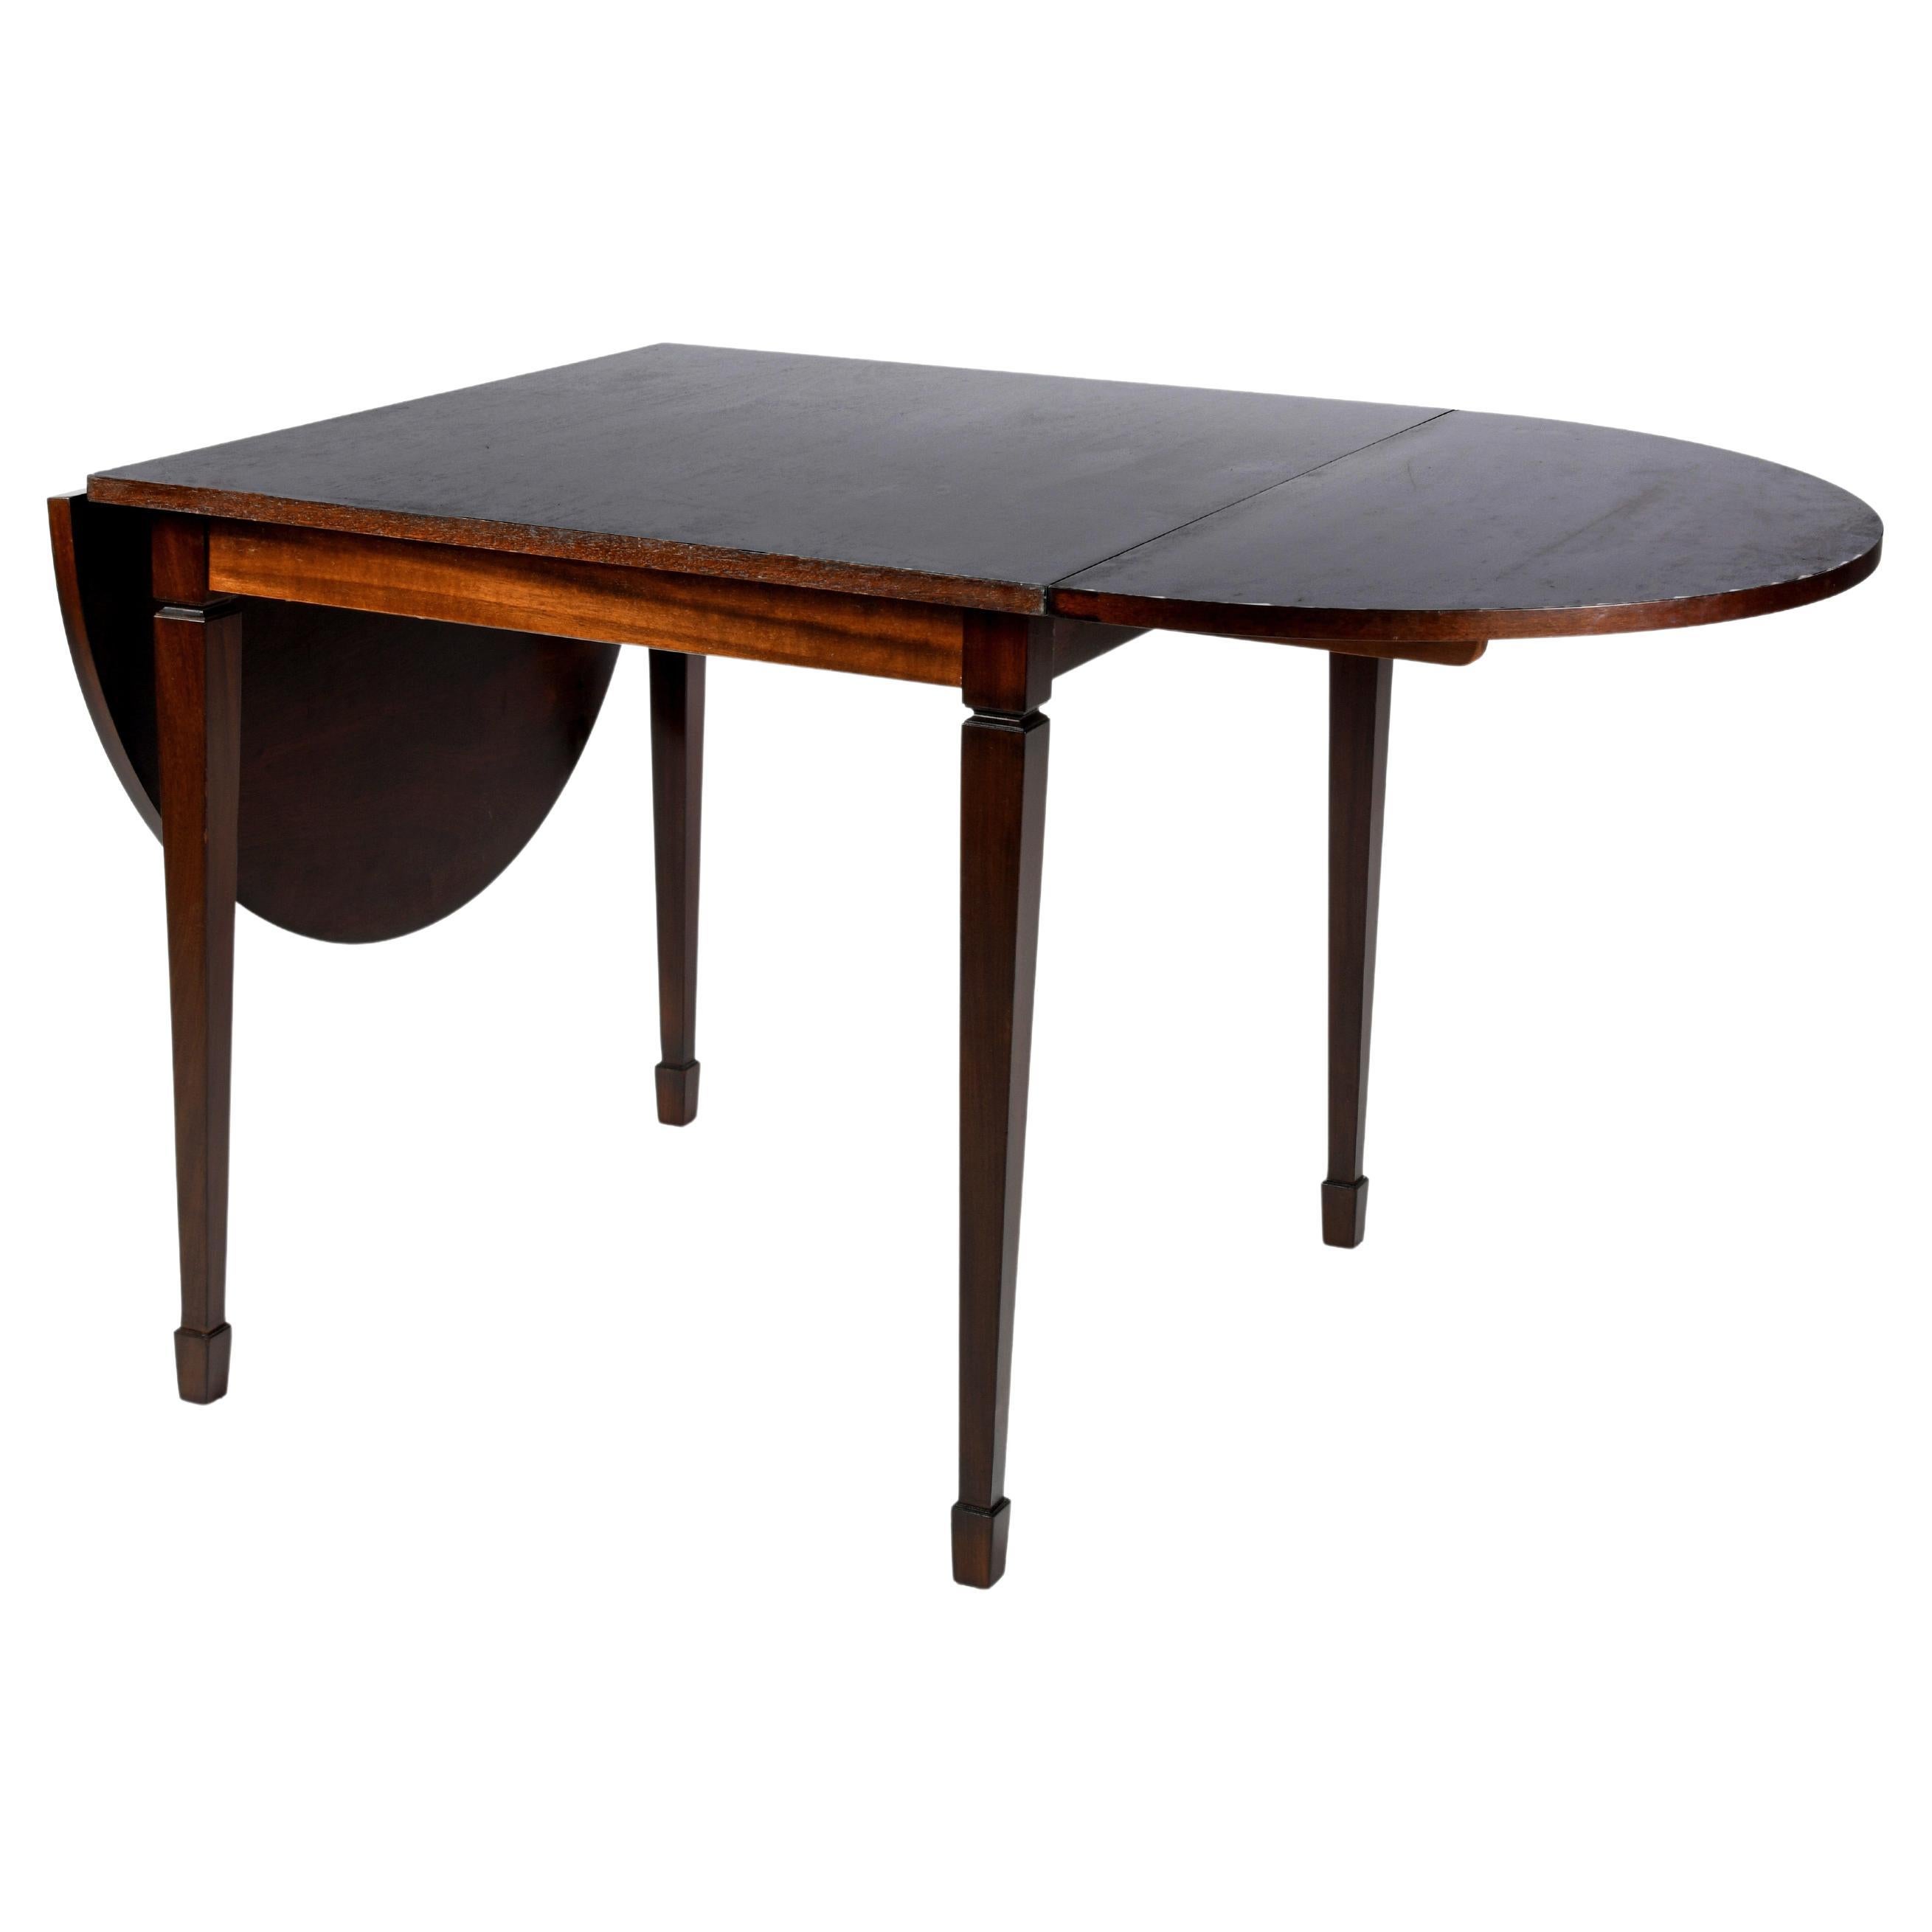 What is a drop leaf dining table?